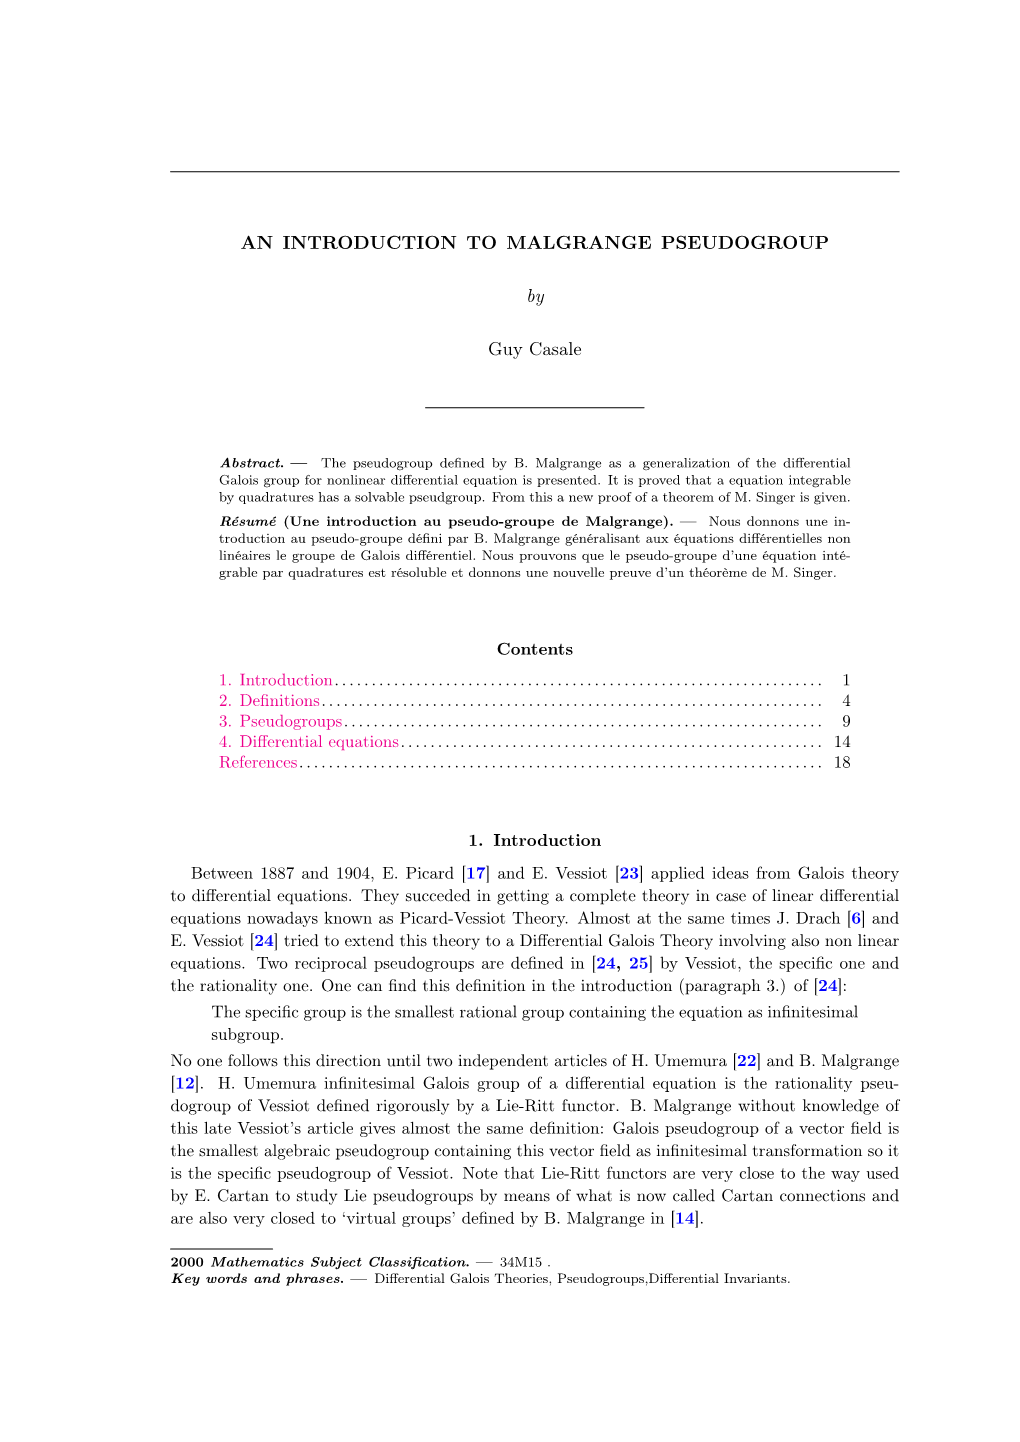 AN INTRODUCTION to MALGRANGE PSEUDOGROUP By